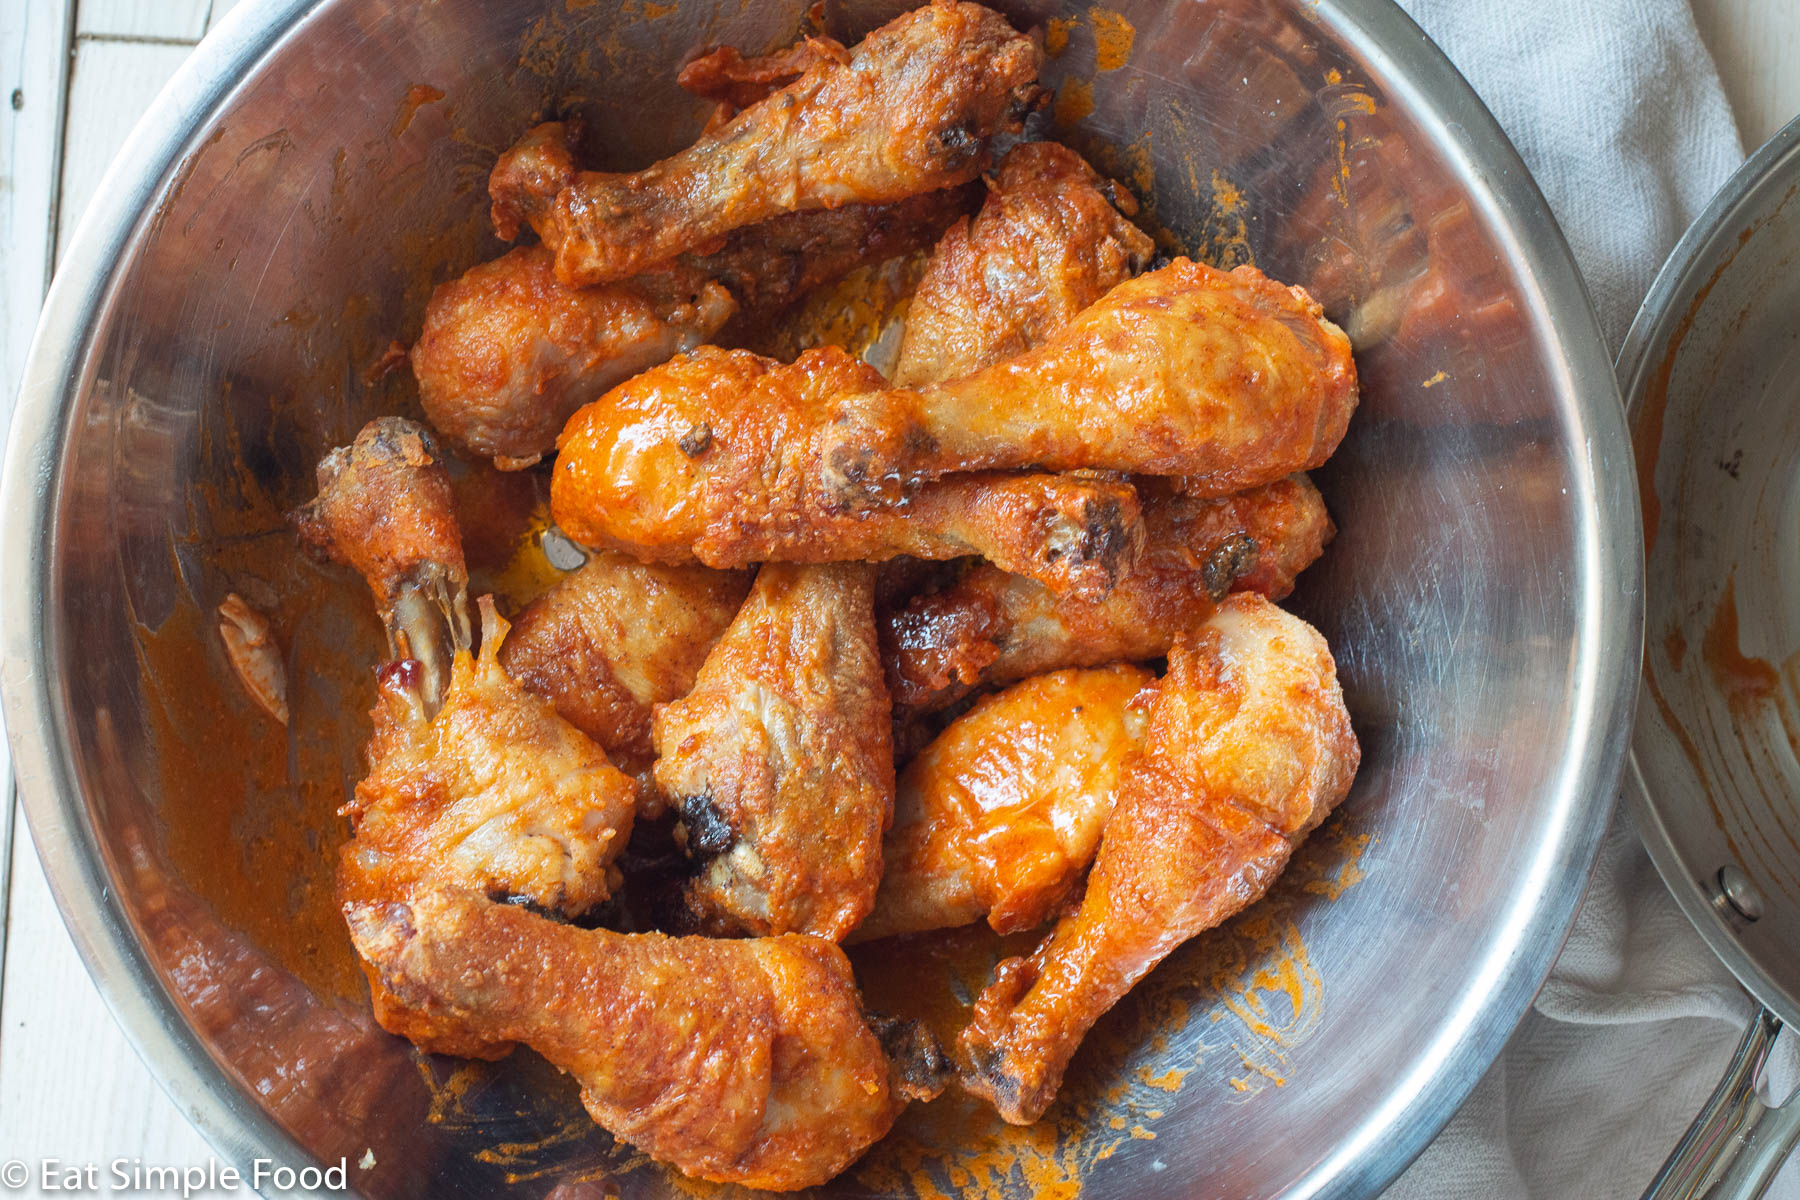 12 baked chicken drumsticks with a red/orange hot sauce coating tossed in a stainless steel bowl. Top view.